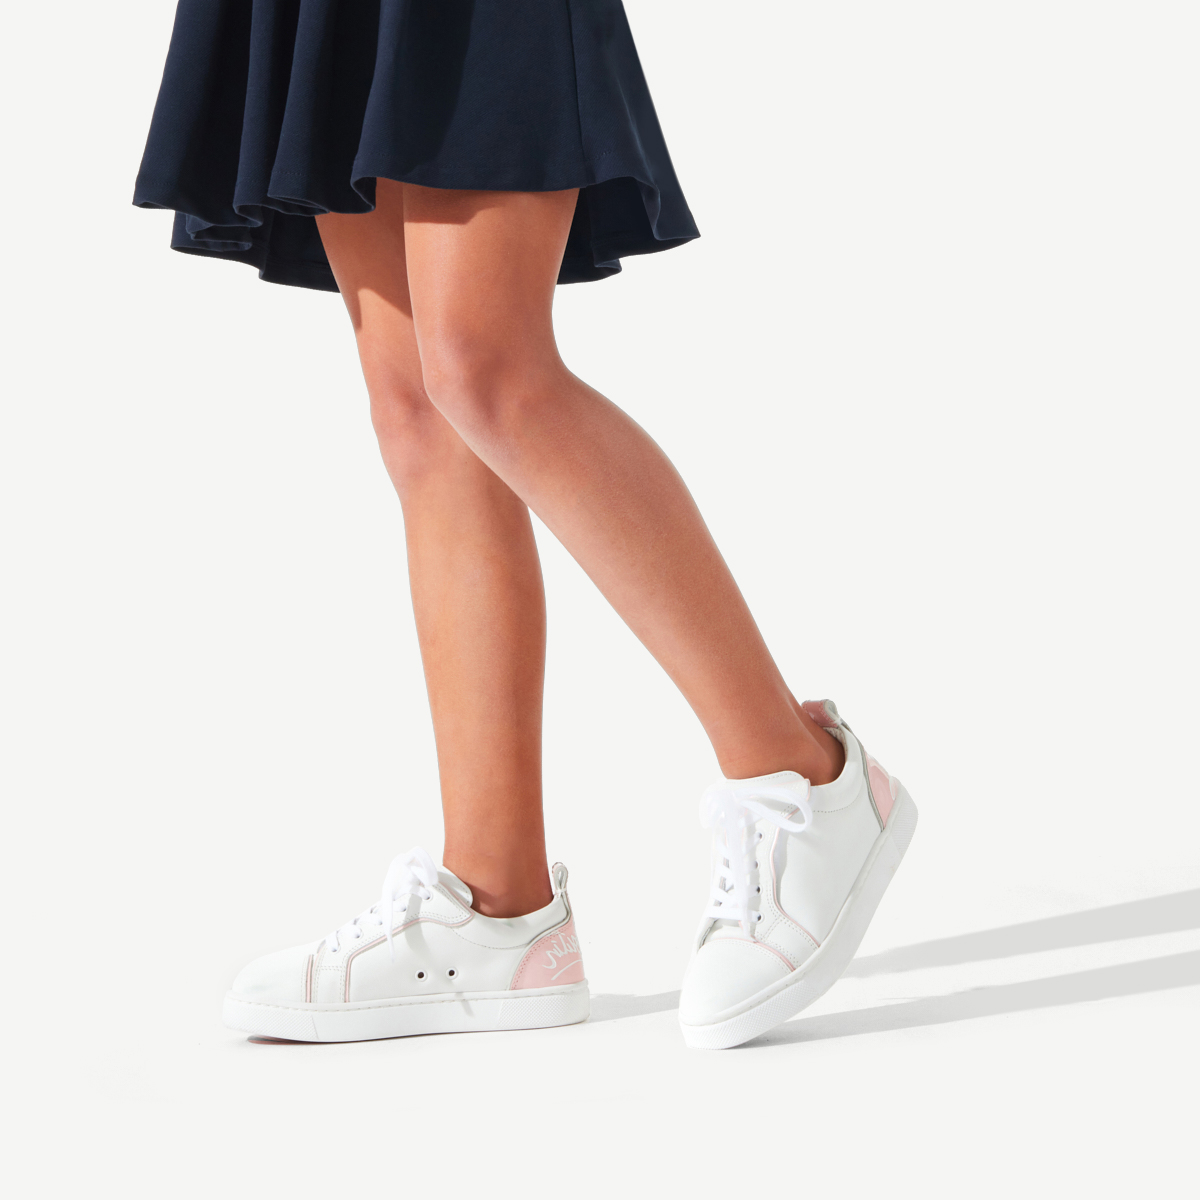 Funnyto - Low-top sneakers - Calf leather - Navy - Christian Louboutin